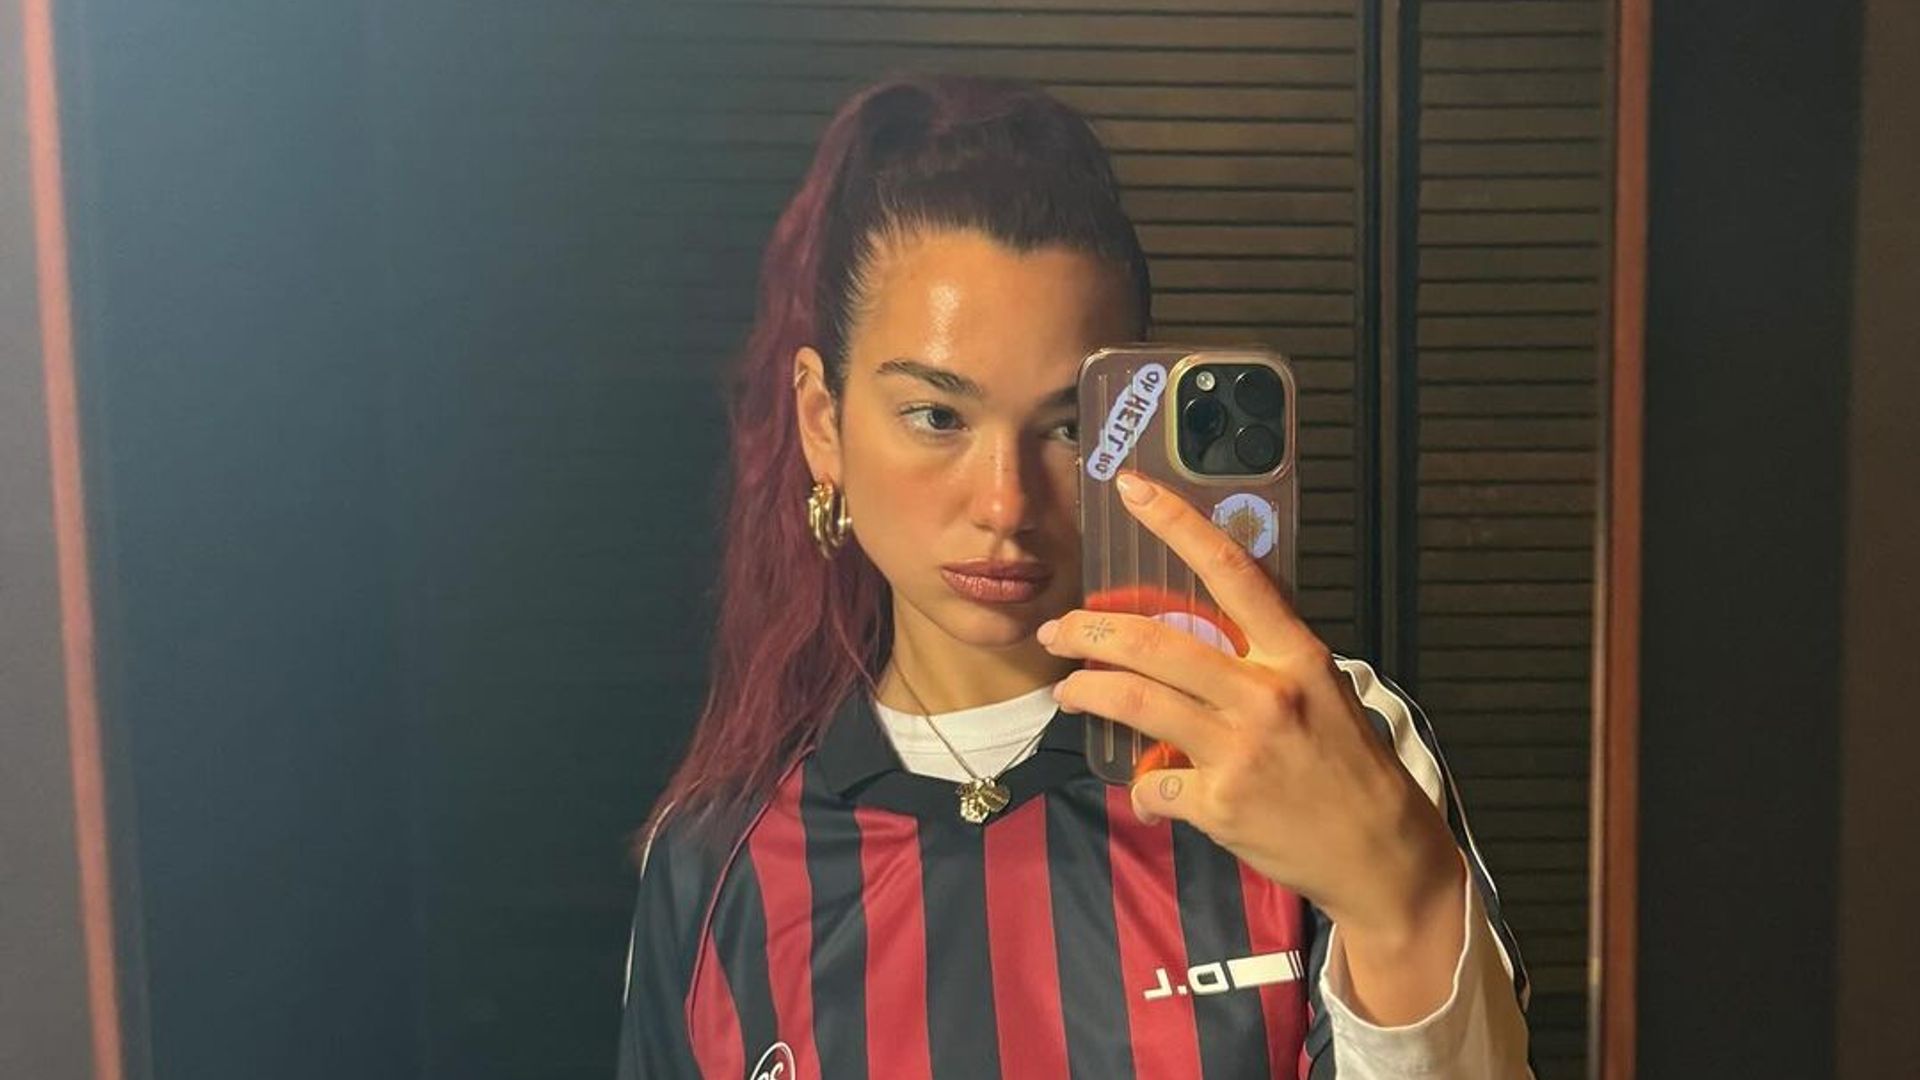 Dua shared images in a football to Instagram